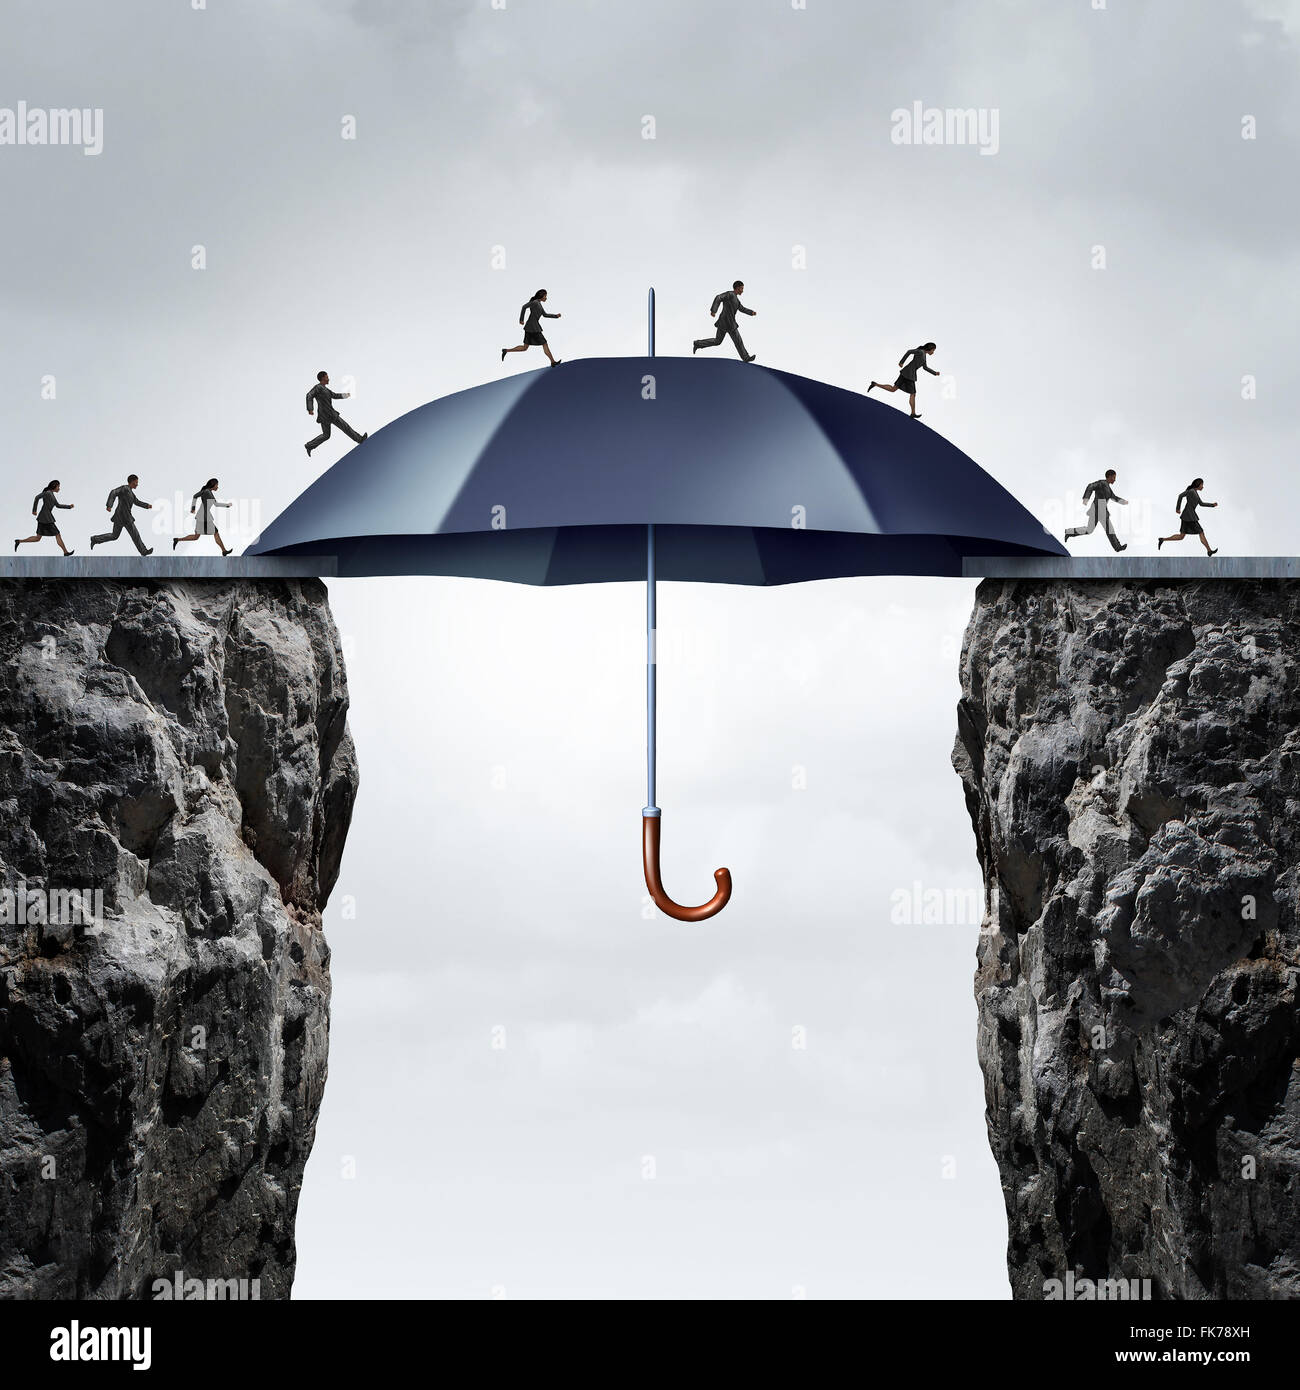 Security bridge concept as business people running across two high cliffs with the help of a safe giant umbrella bridging the gap. Stock Photo